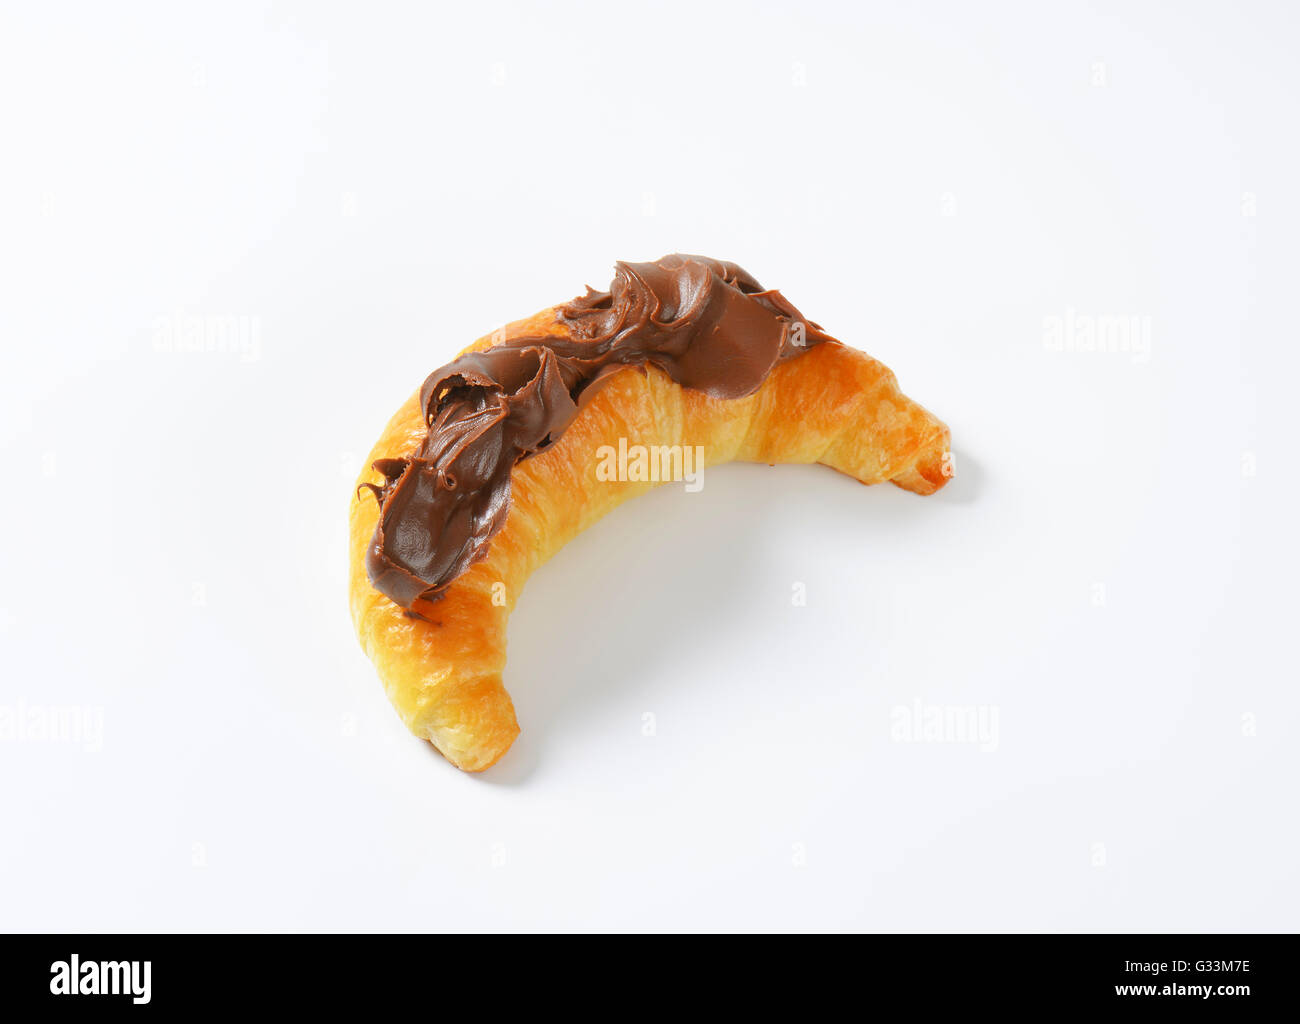 croissant topped with chocolate cream on white background Stock Photo